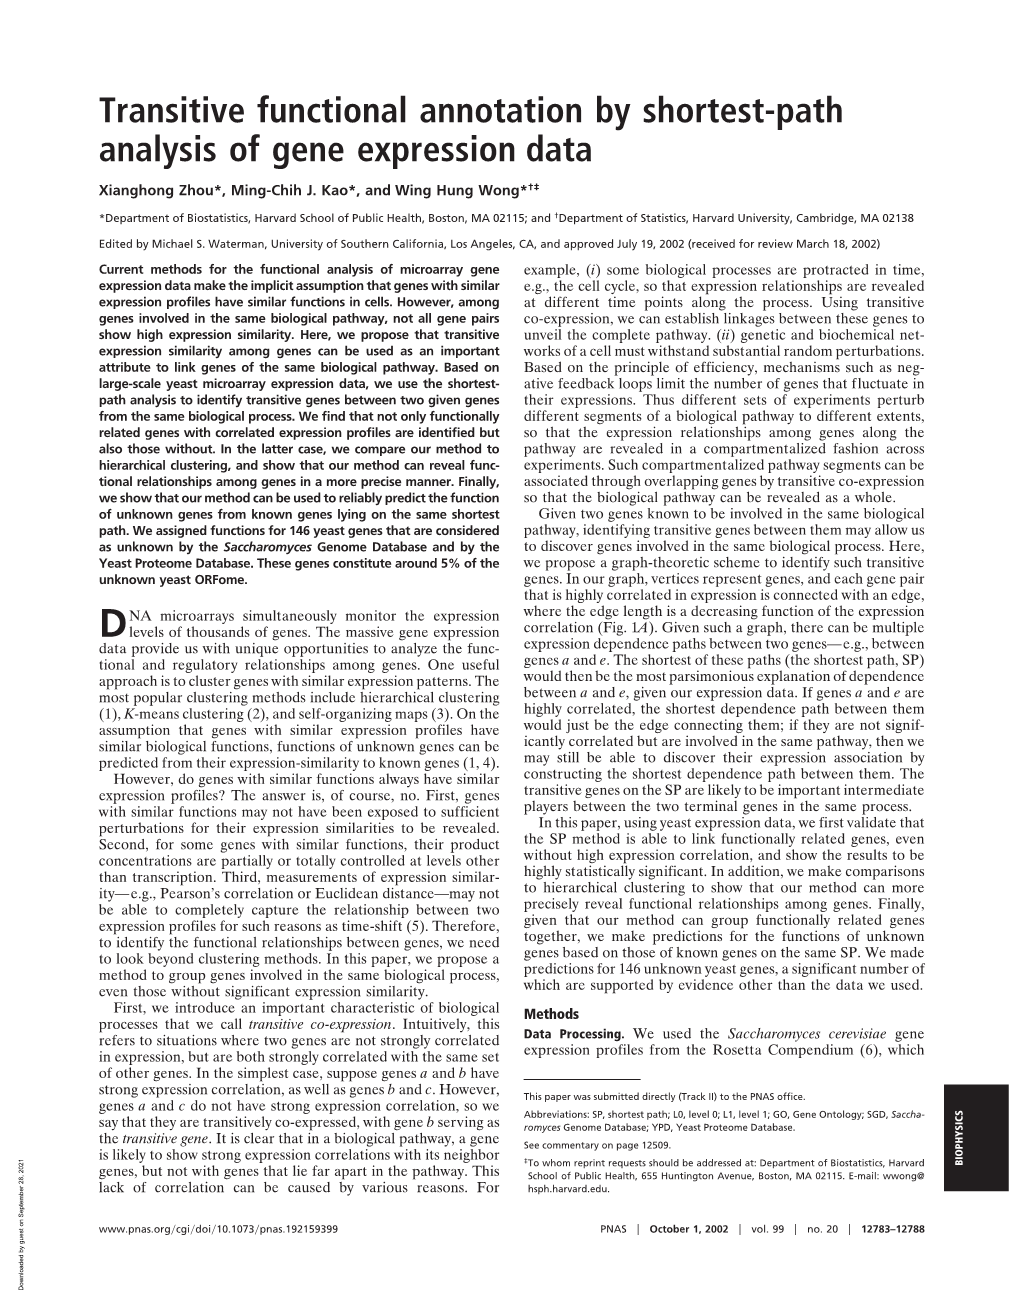 Transitive Functional Annotation by Shortest-Path Analysis of Gene Expression Data